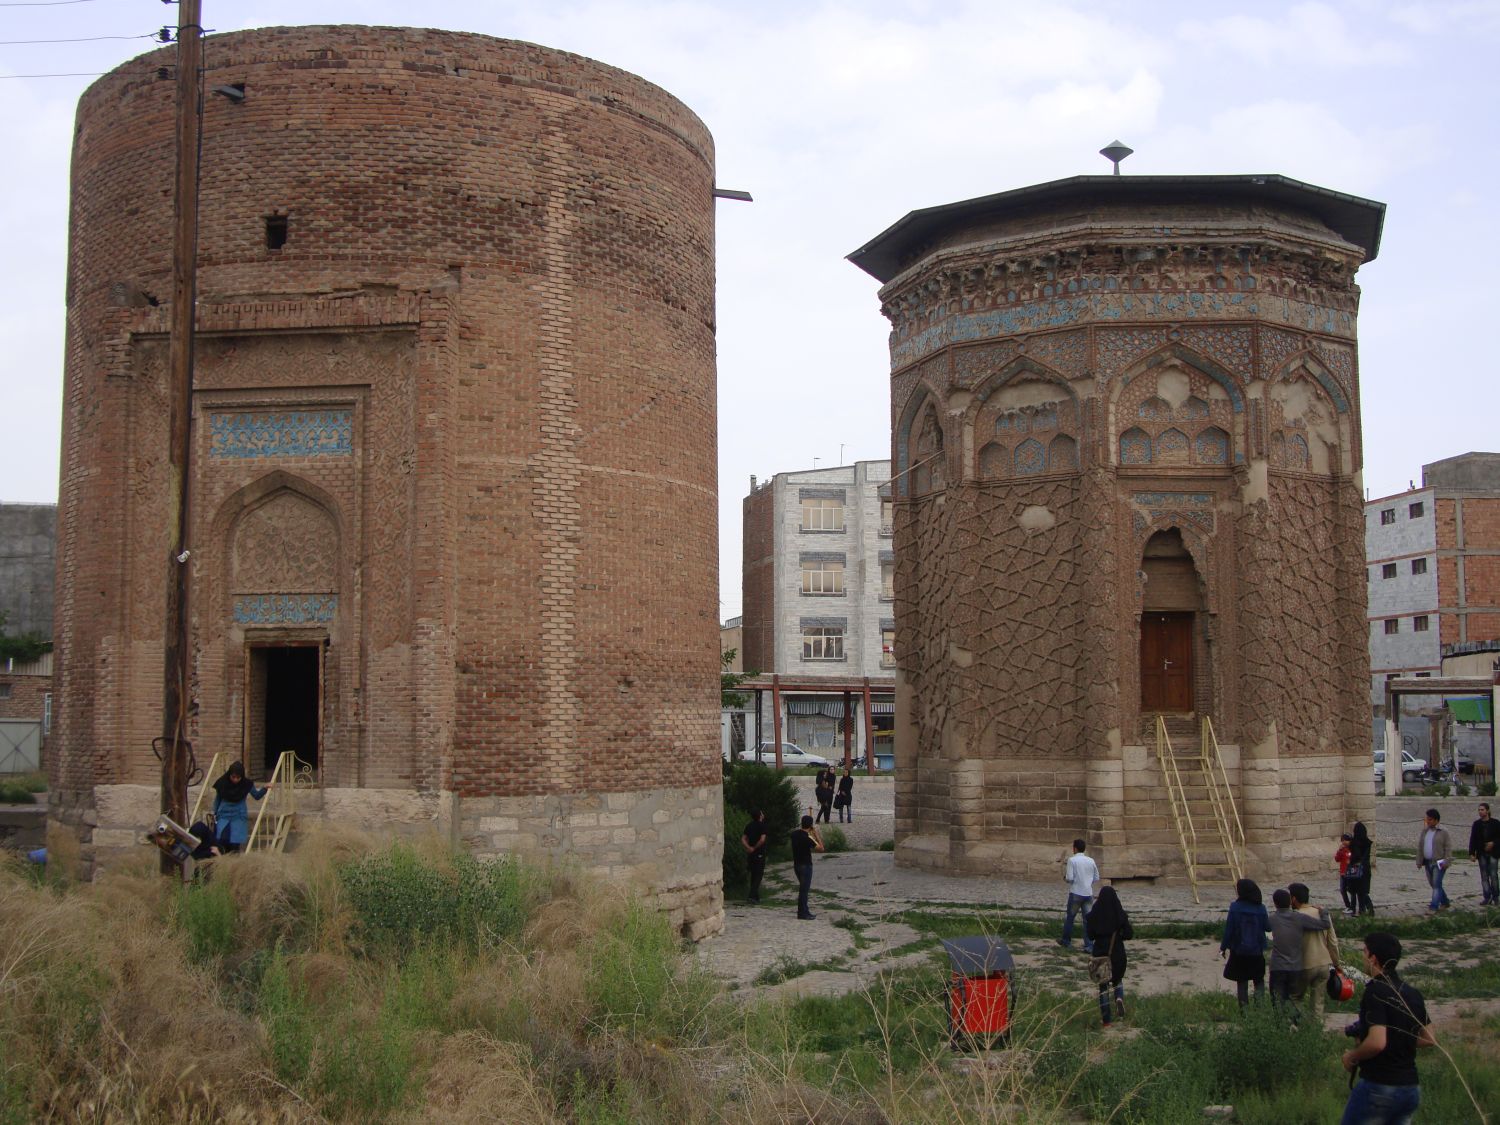 Exterior view, portal facades of adjacent tombs, the round tomb tower and Gunbad-i Qabud